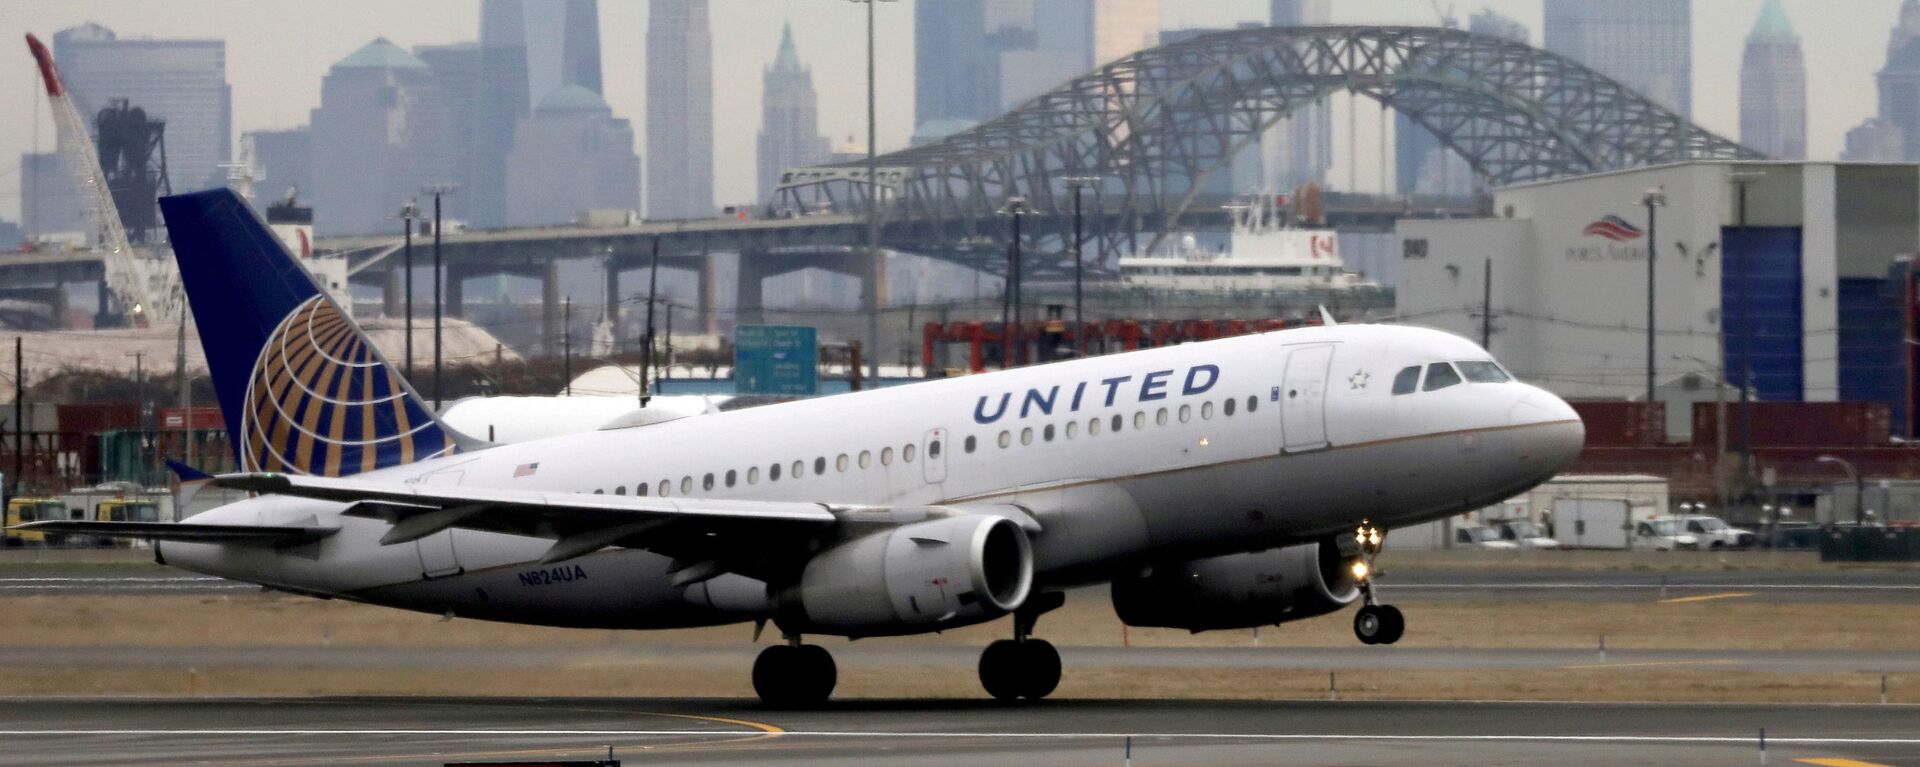 A United Airlines passenger jet takes off with New York City as a backdrop, at Newark Liberty International Airport, New Jersey, U.S. December 6, 2019. - Sputnik International, 1920, 07.08.2021